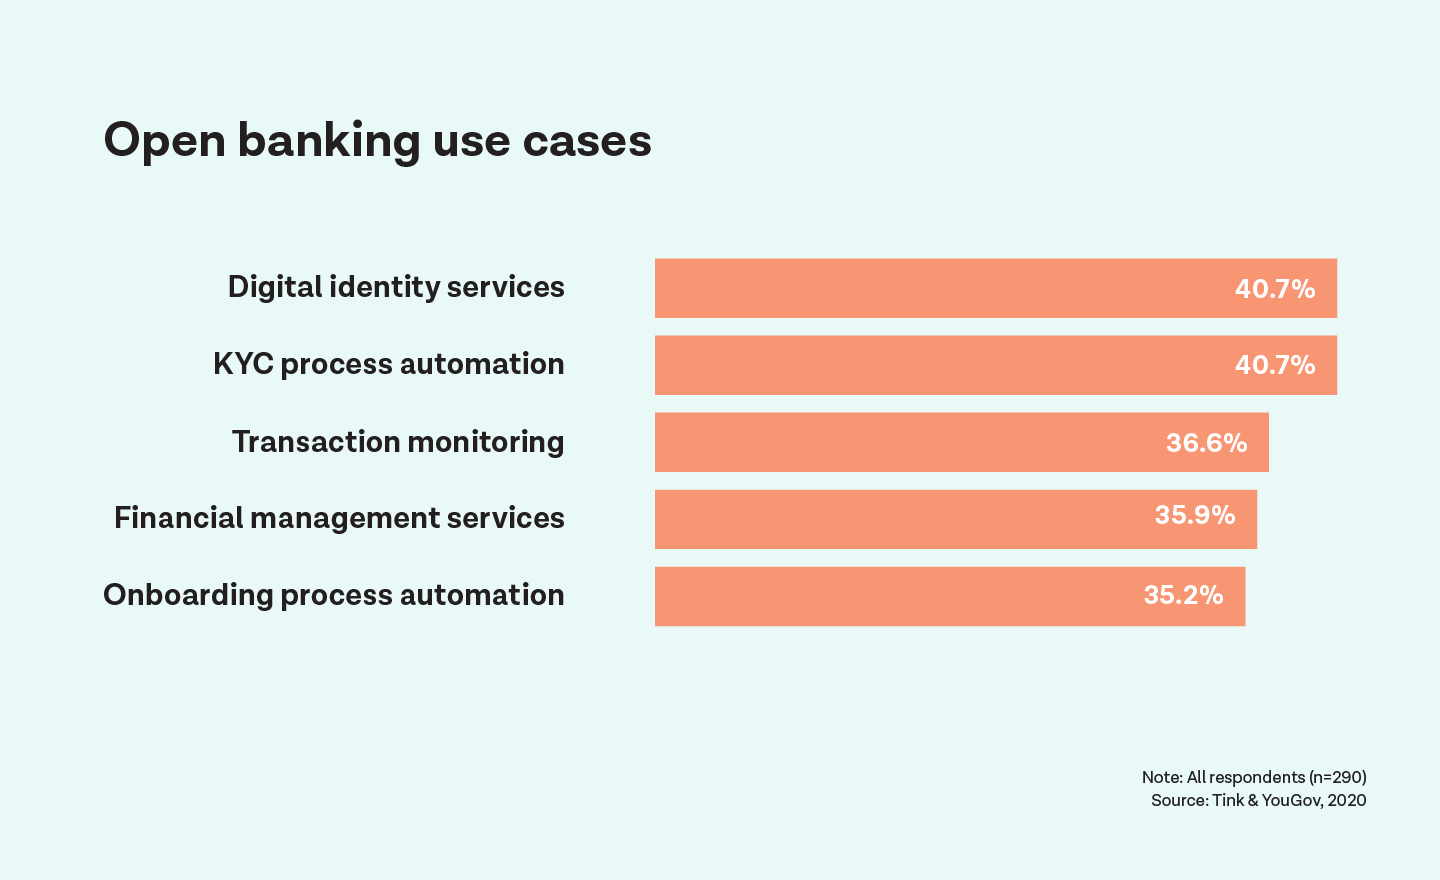 5 open banking use cases European bankers are most investing in